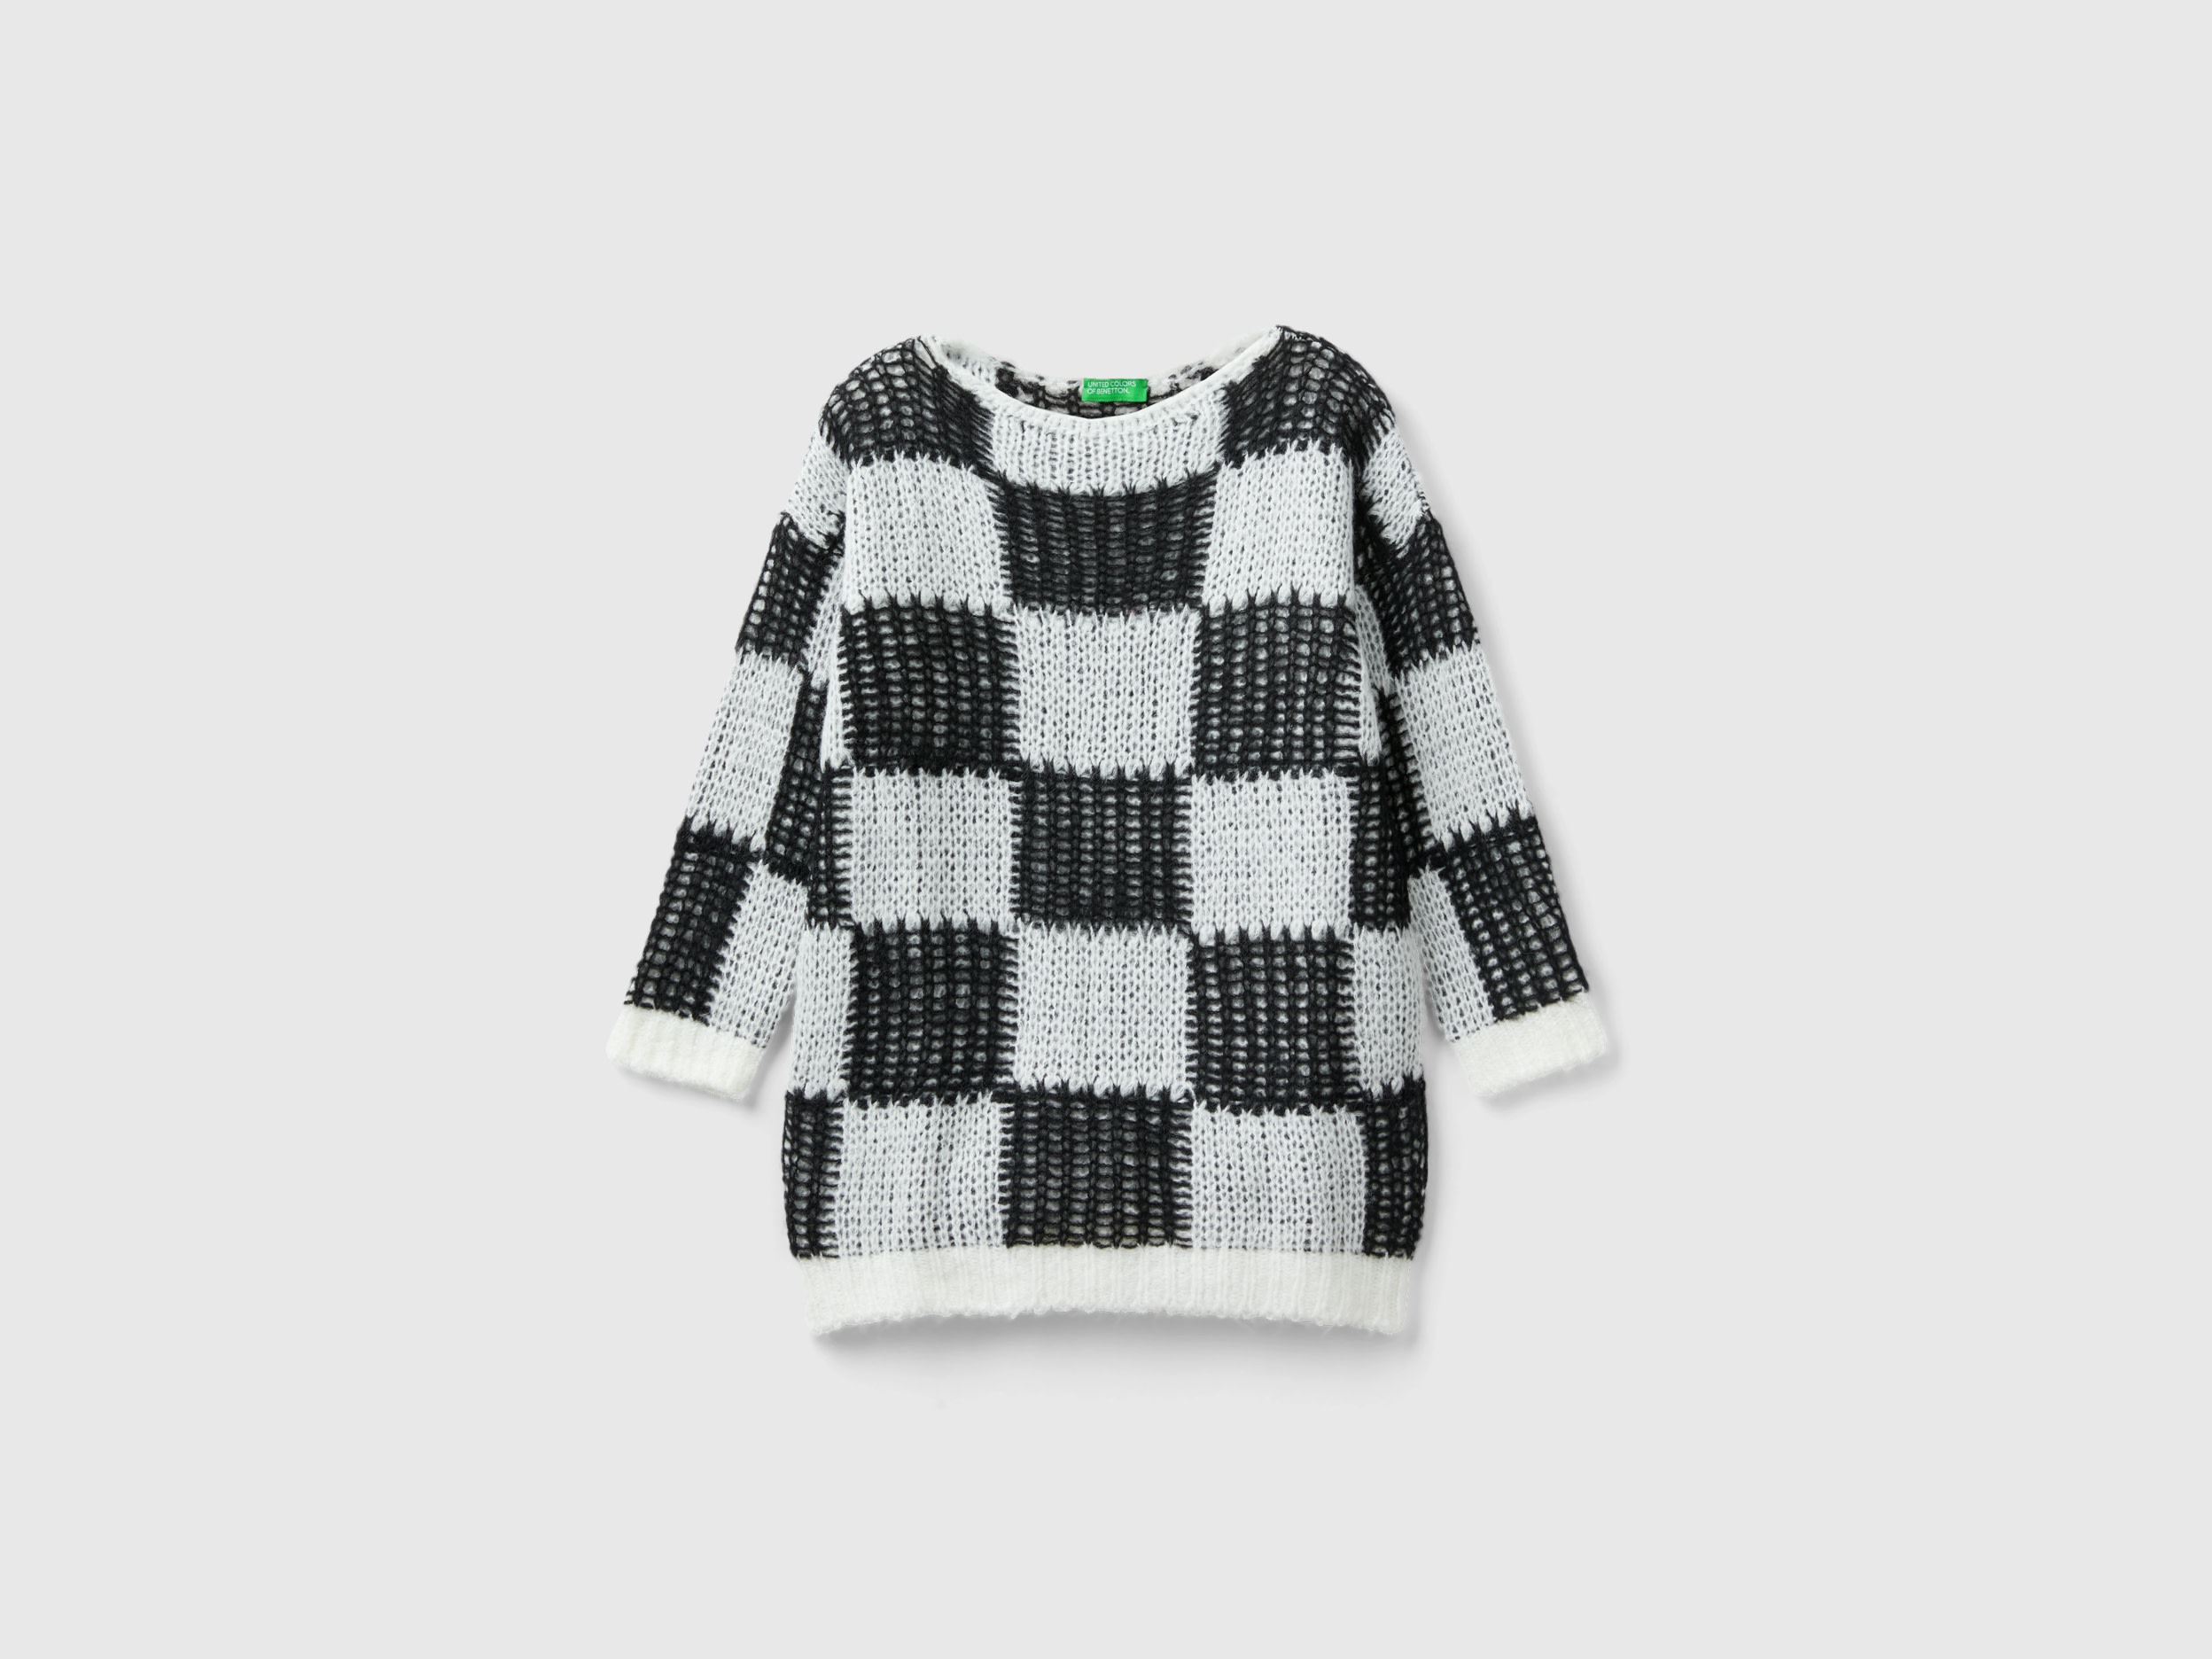 Benetton, Oversized Fit Check Sweater, size 3XL, Multi-color, Kids